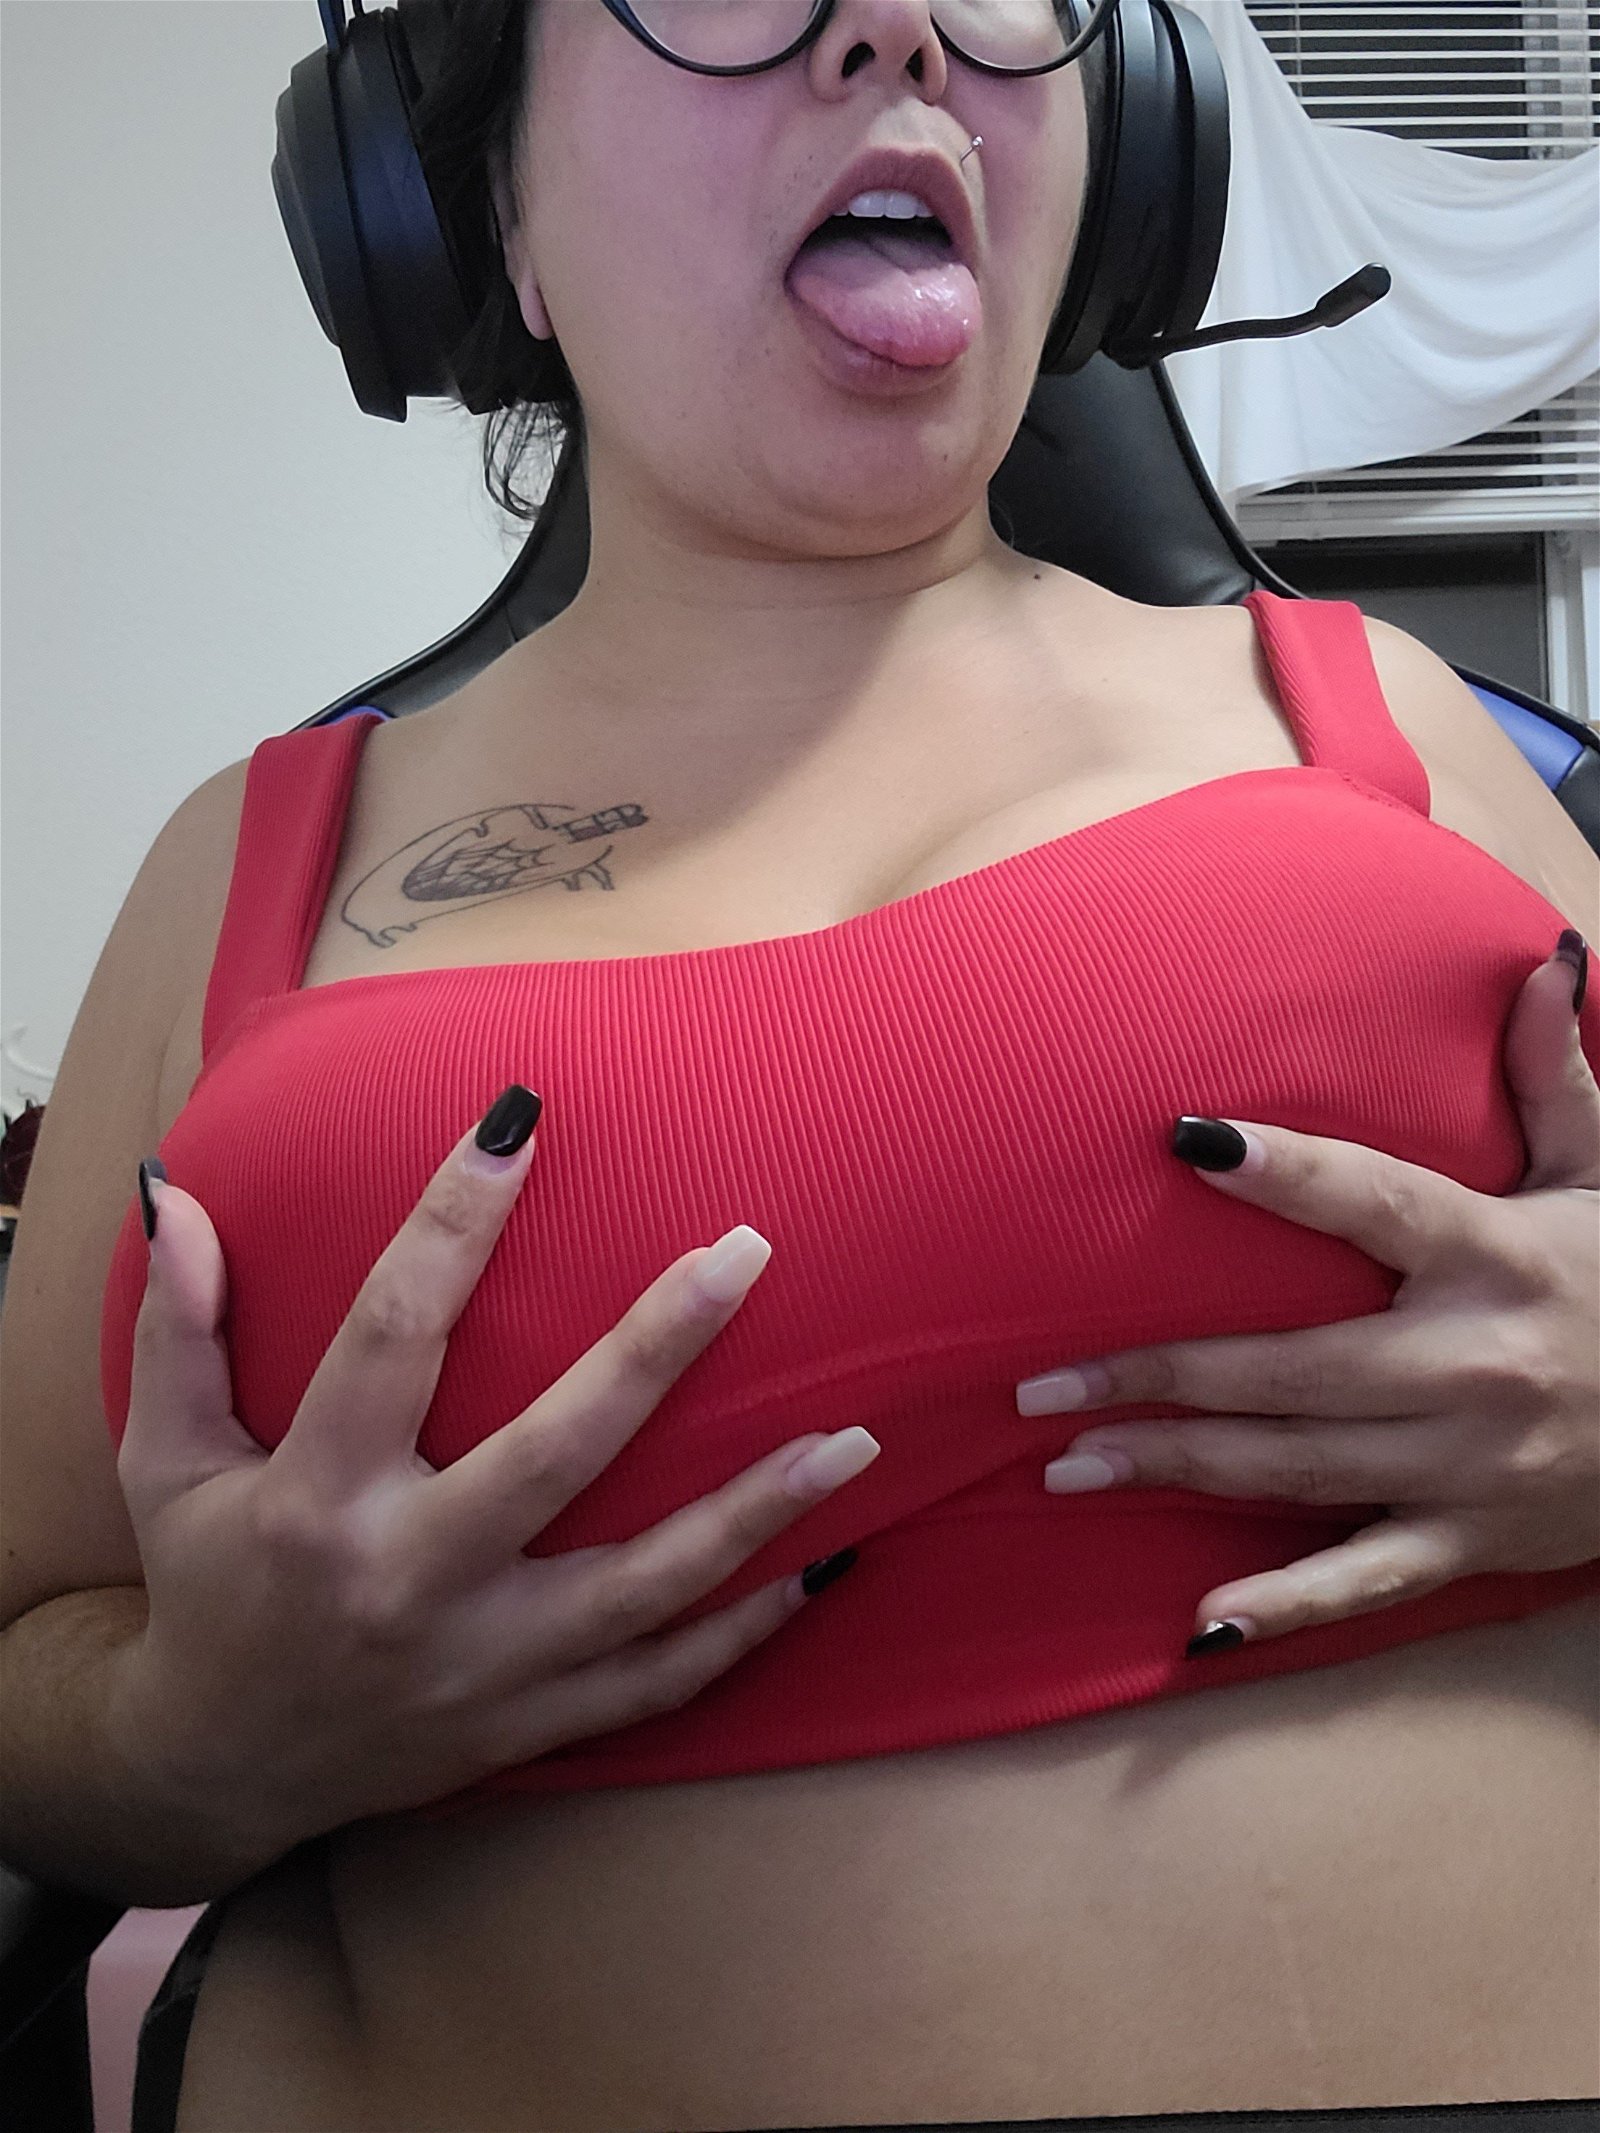 Watch the Photo by NyxTresa with the username @NyxTresa, who is a star user, posted on December 19, 2023. The post is about the topic Tit Worship. and the text says 'Playing games after a long day. 

Been teasing myself a little on and off all day...

#NyxTresa #AltModel #Tits #BigTits #TitWorship'